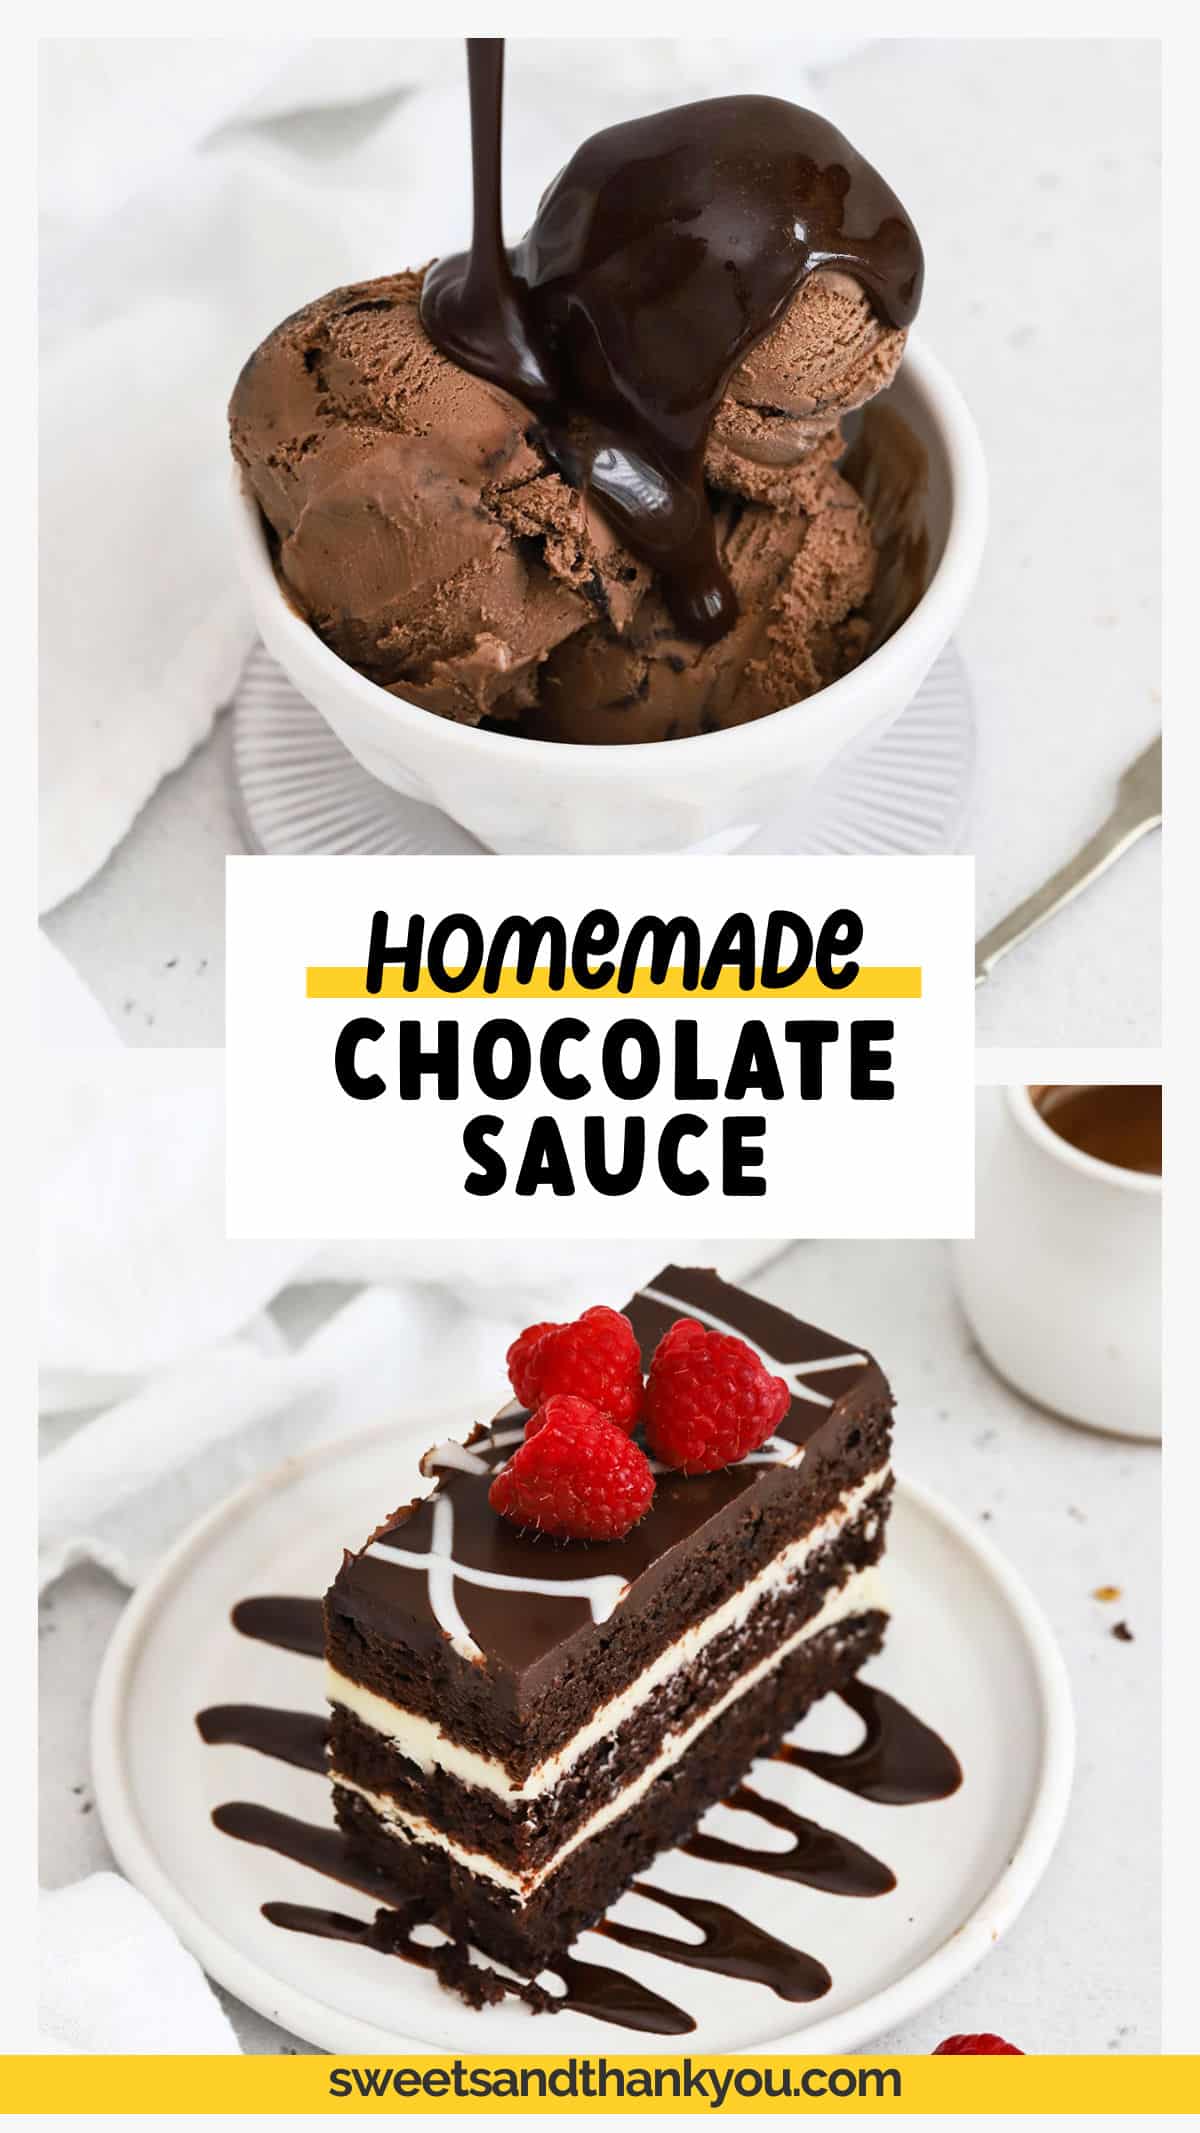 Learn how to make Homemade Chocolate Syrup! This easy chocolate sauce recipe is perfect for ice cream, chocolate milk, and so much more. It's like homemade Hershey's syrup! Get the recipe + TONS of delicious ways to use it at sweetsandthankyou.com